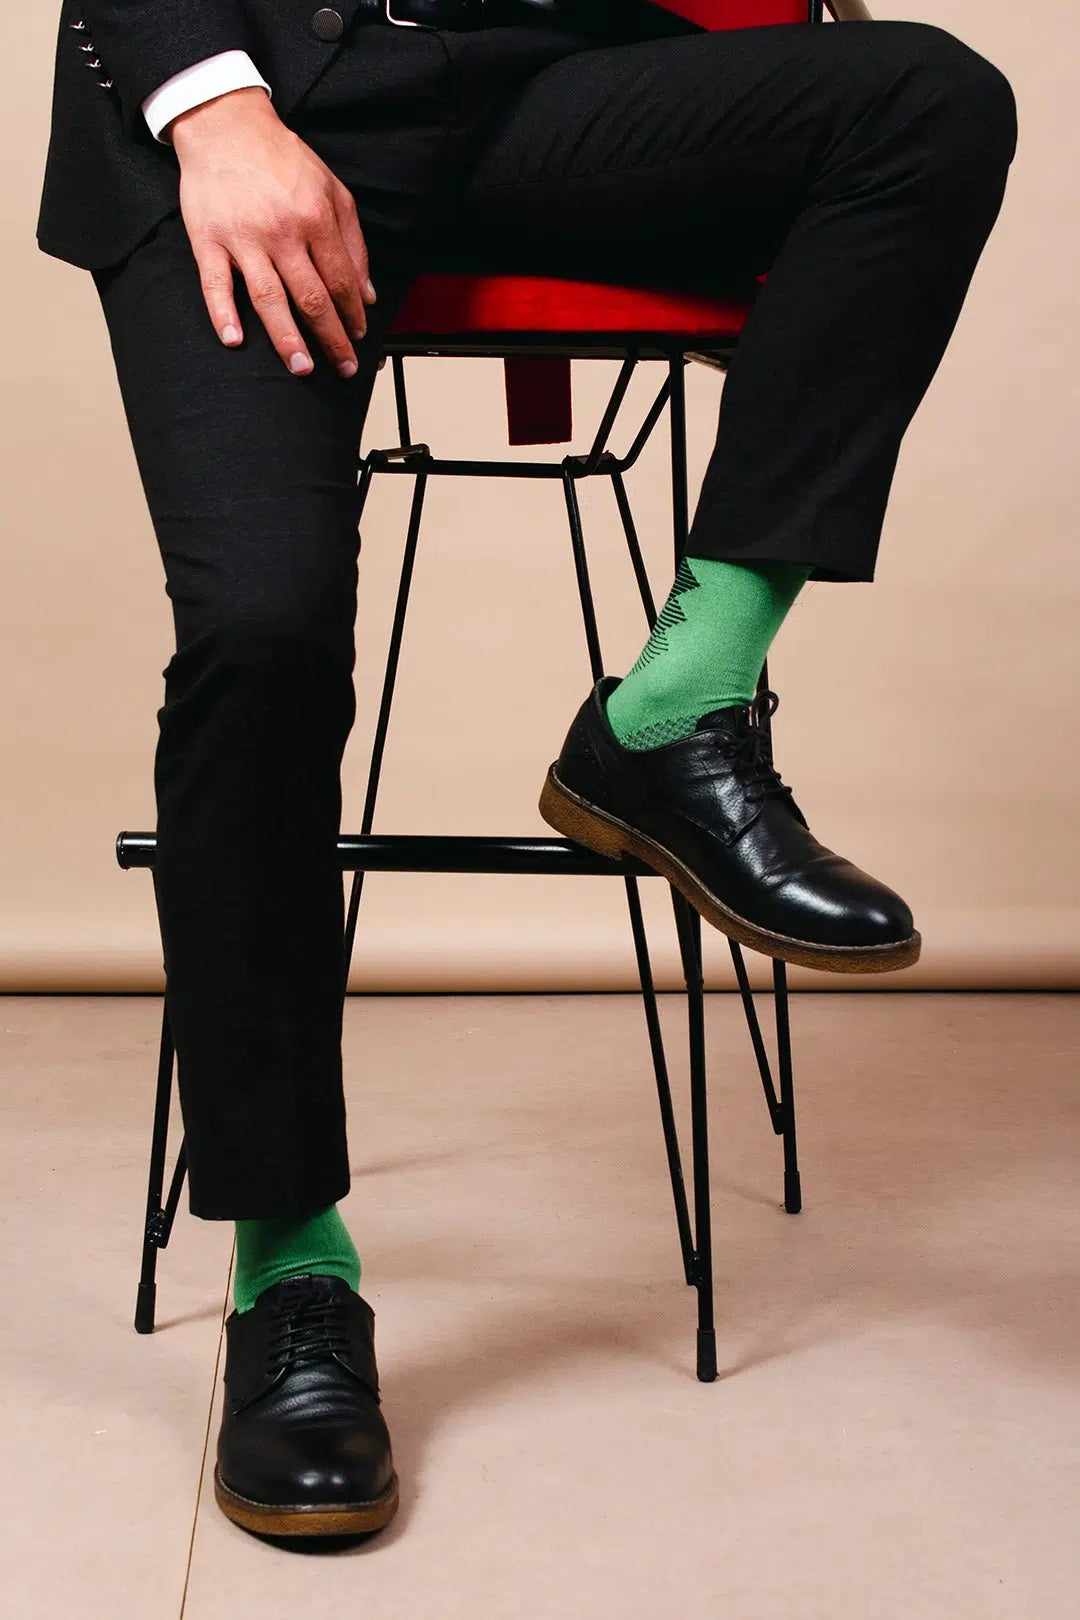 GoWith-green-patterned-dress-socks